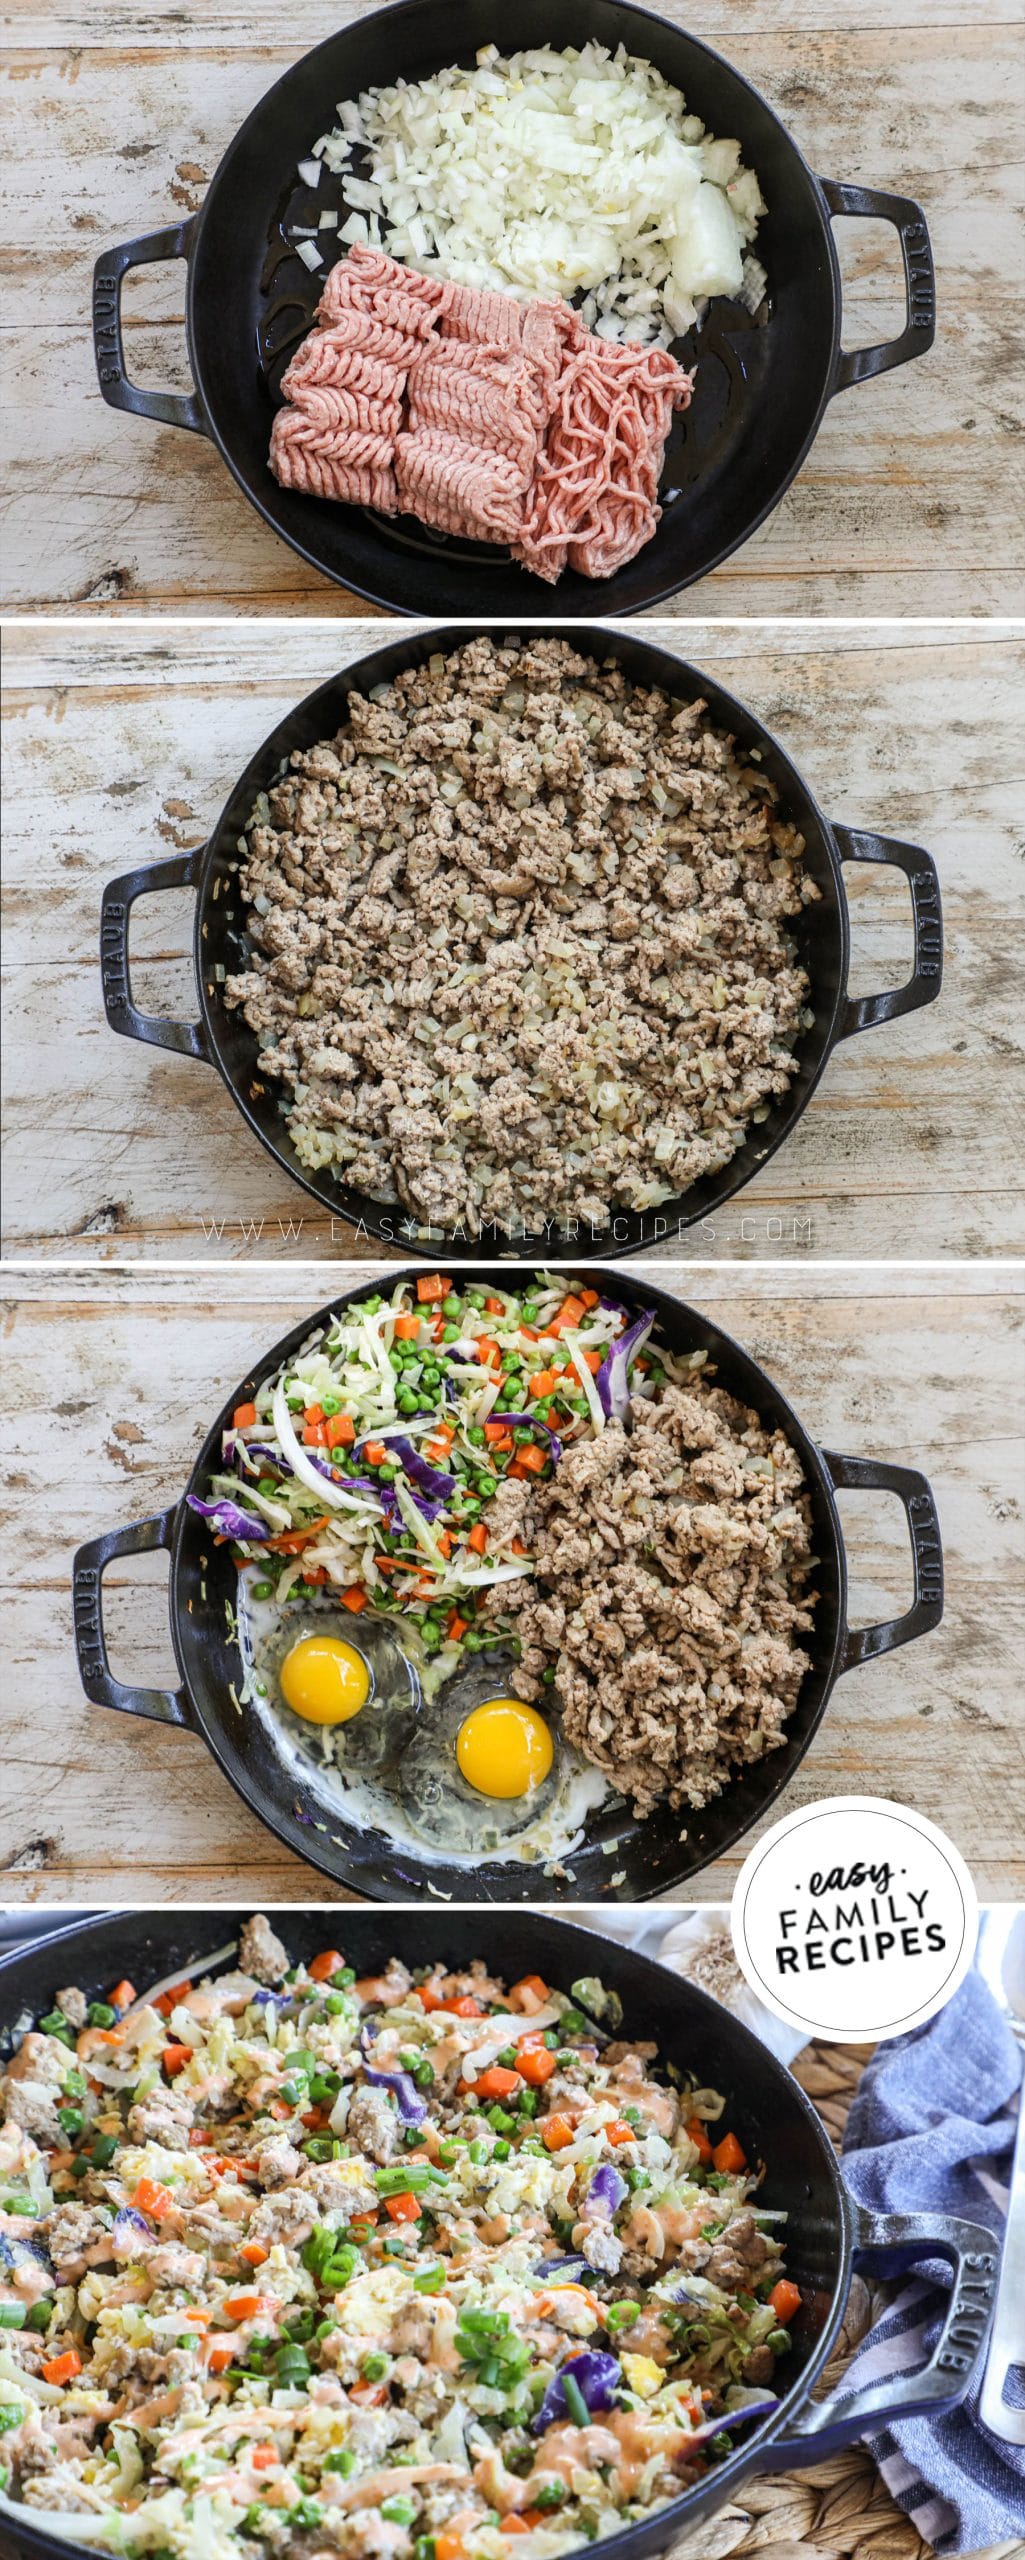 How to stir fry ground turkey 1) start with ground turkey and onions 2) brown in a large skillet 3) add vegetables and eggs 4) season and serve stir fry